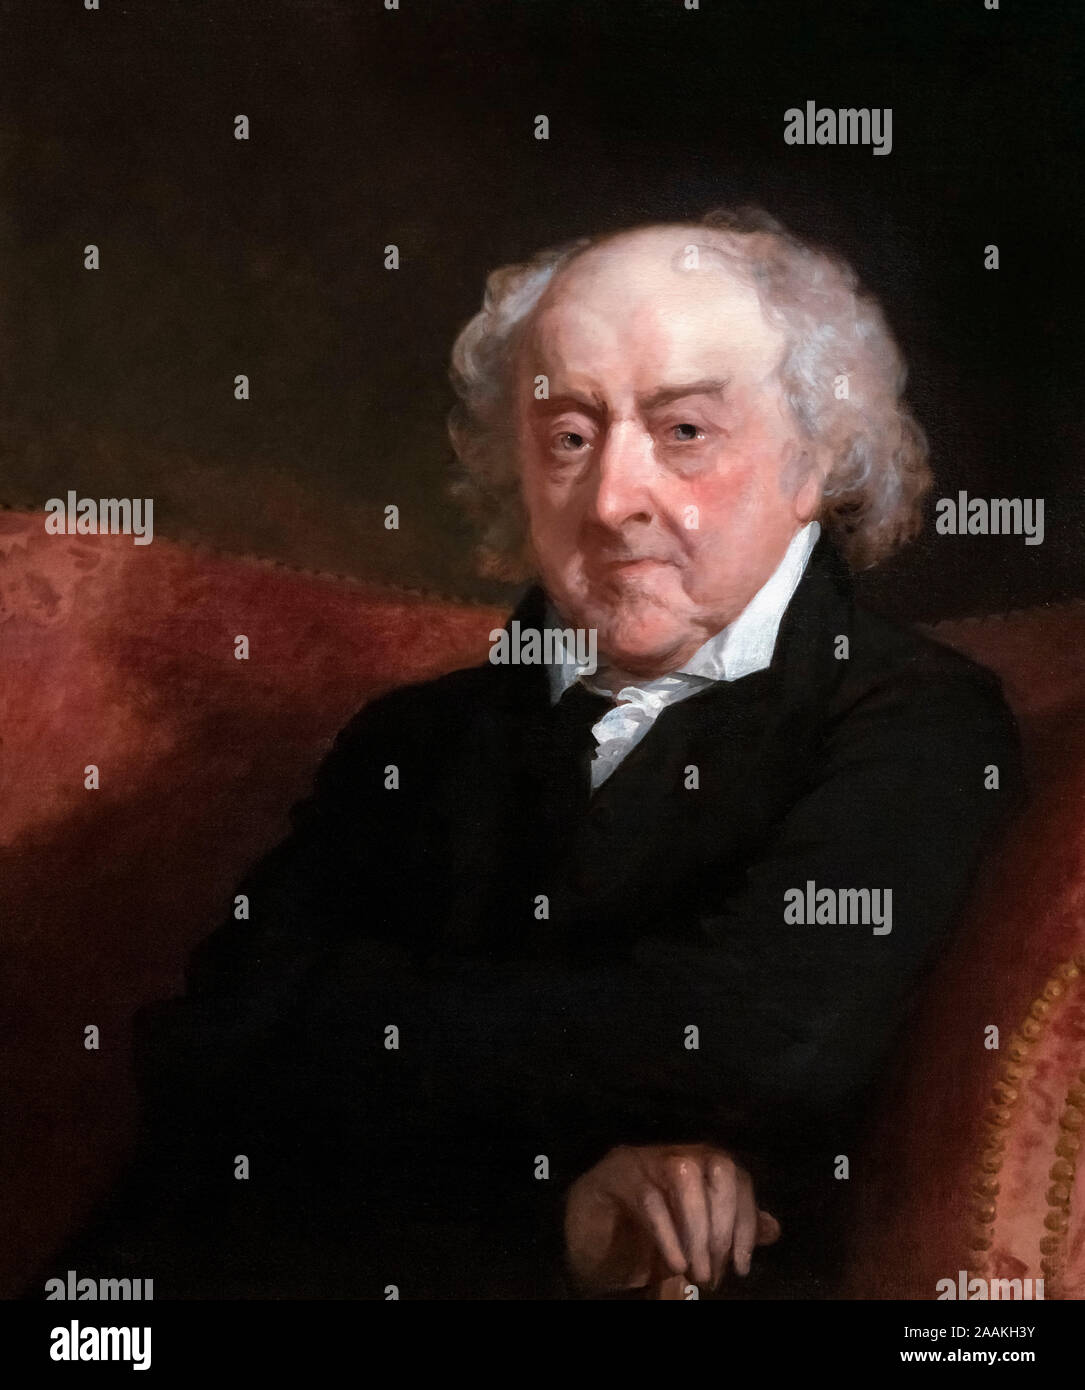 John Adams at the age of nearly 90. Portrait of the 2nd US President, John Adams (1735-1826) by Gilbert Stuartl, oil on canvas, 1823 Stock Photo